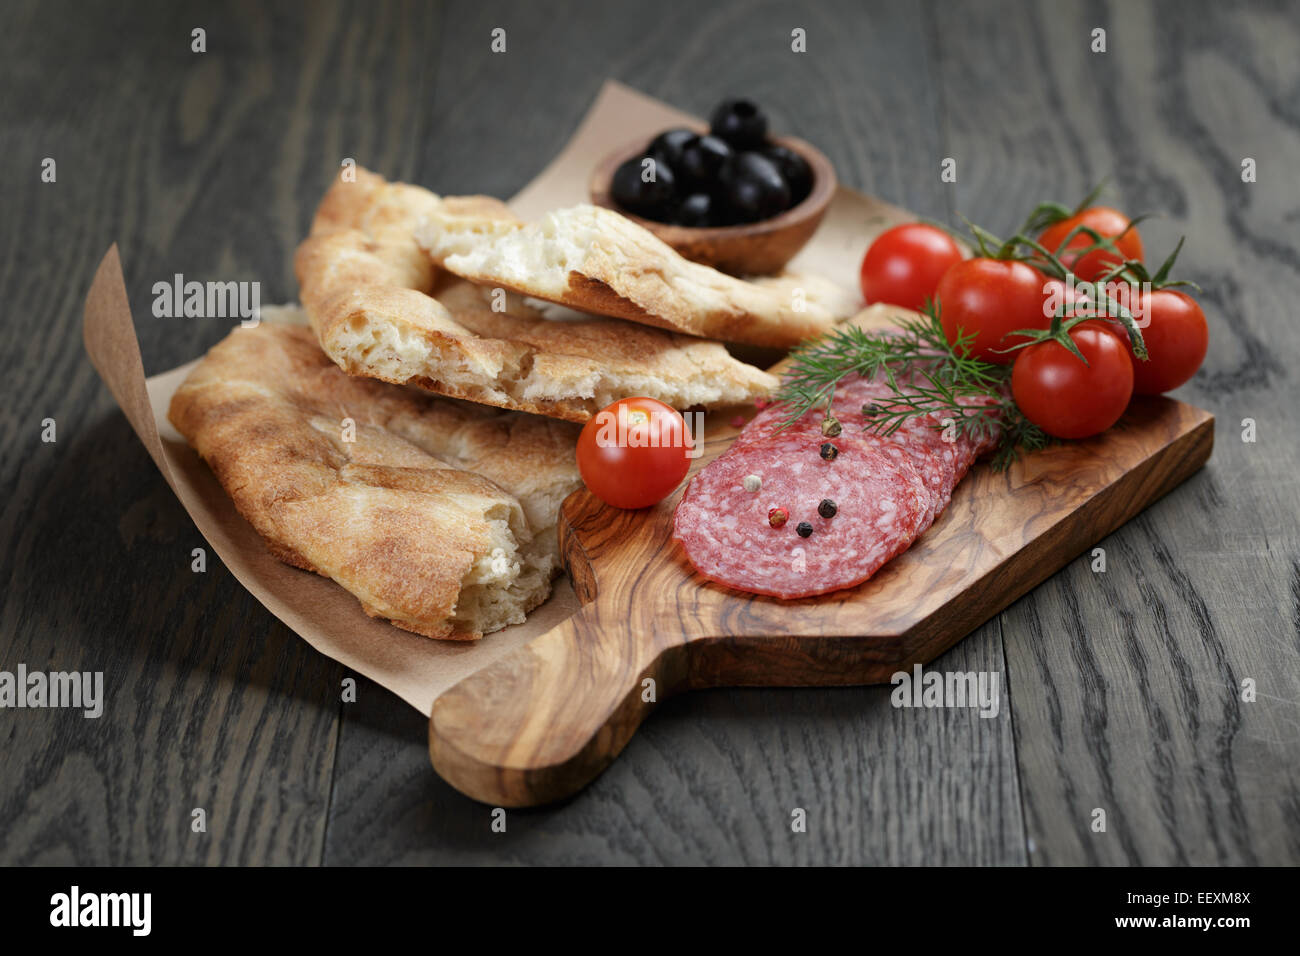 Antipasti with salami, olives, tomatoes and bread on wood table Stock Photo